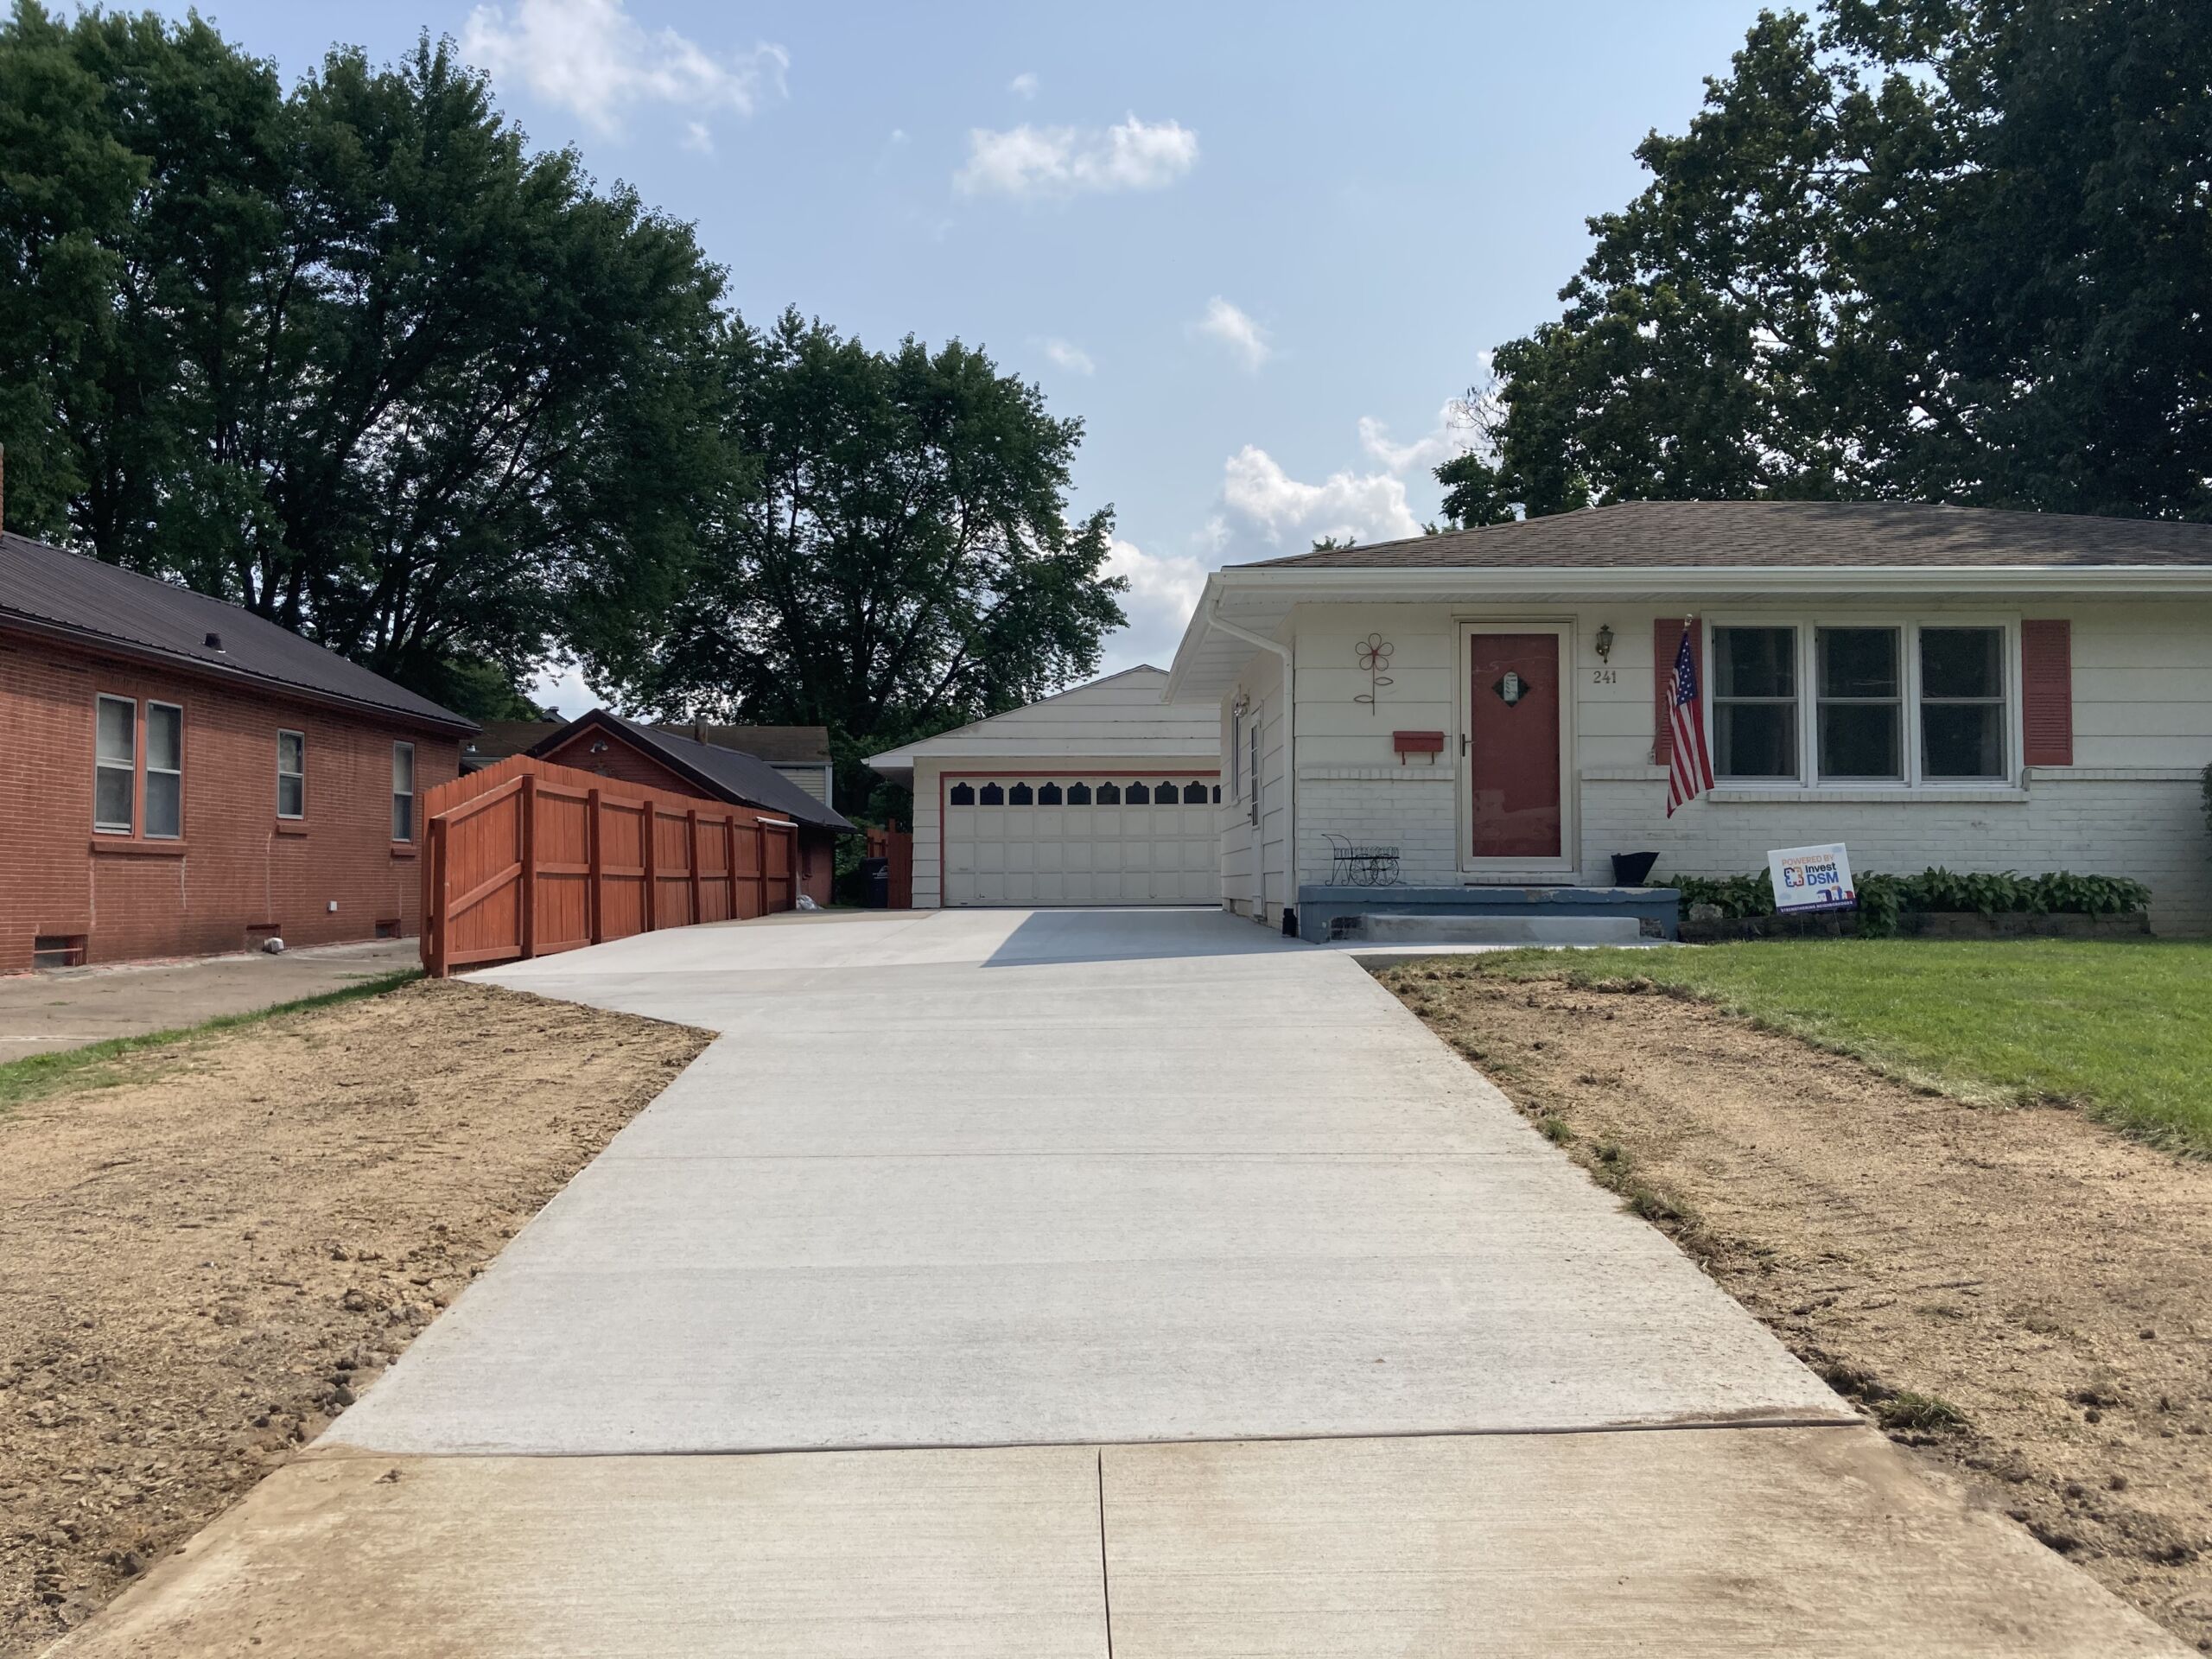 Home with new driveway